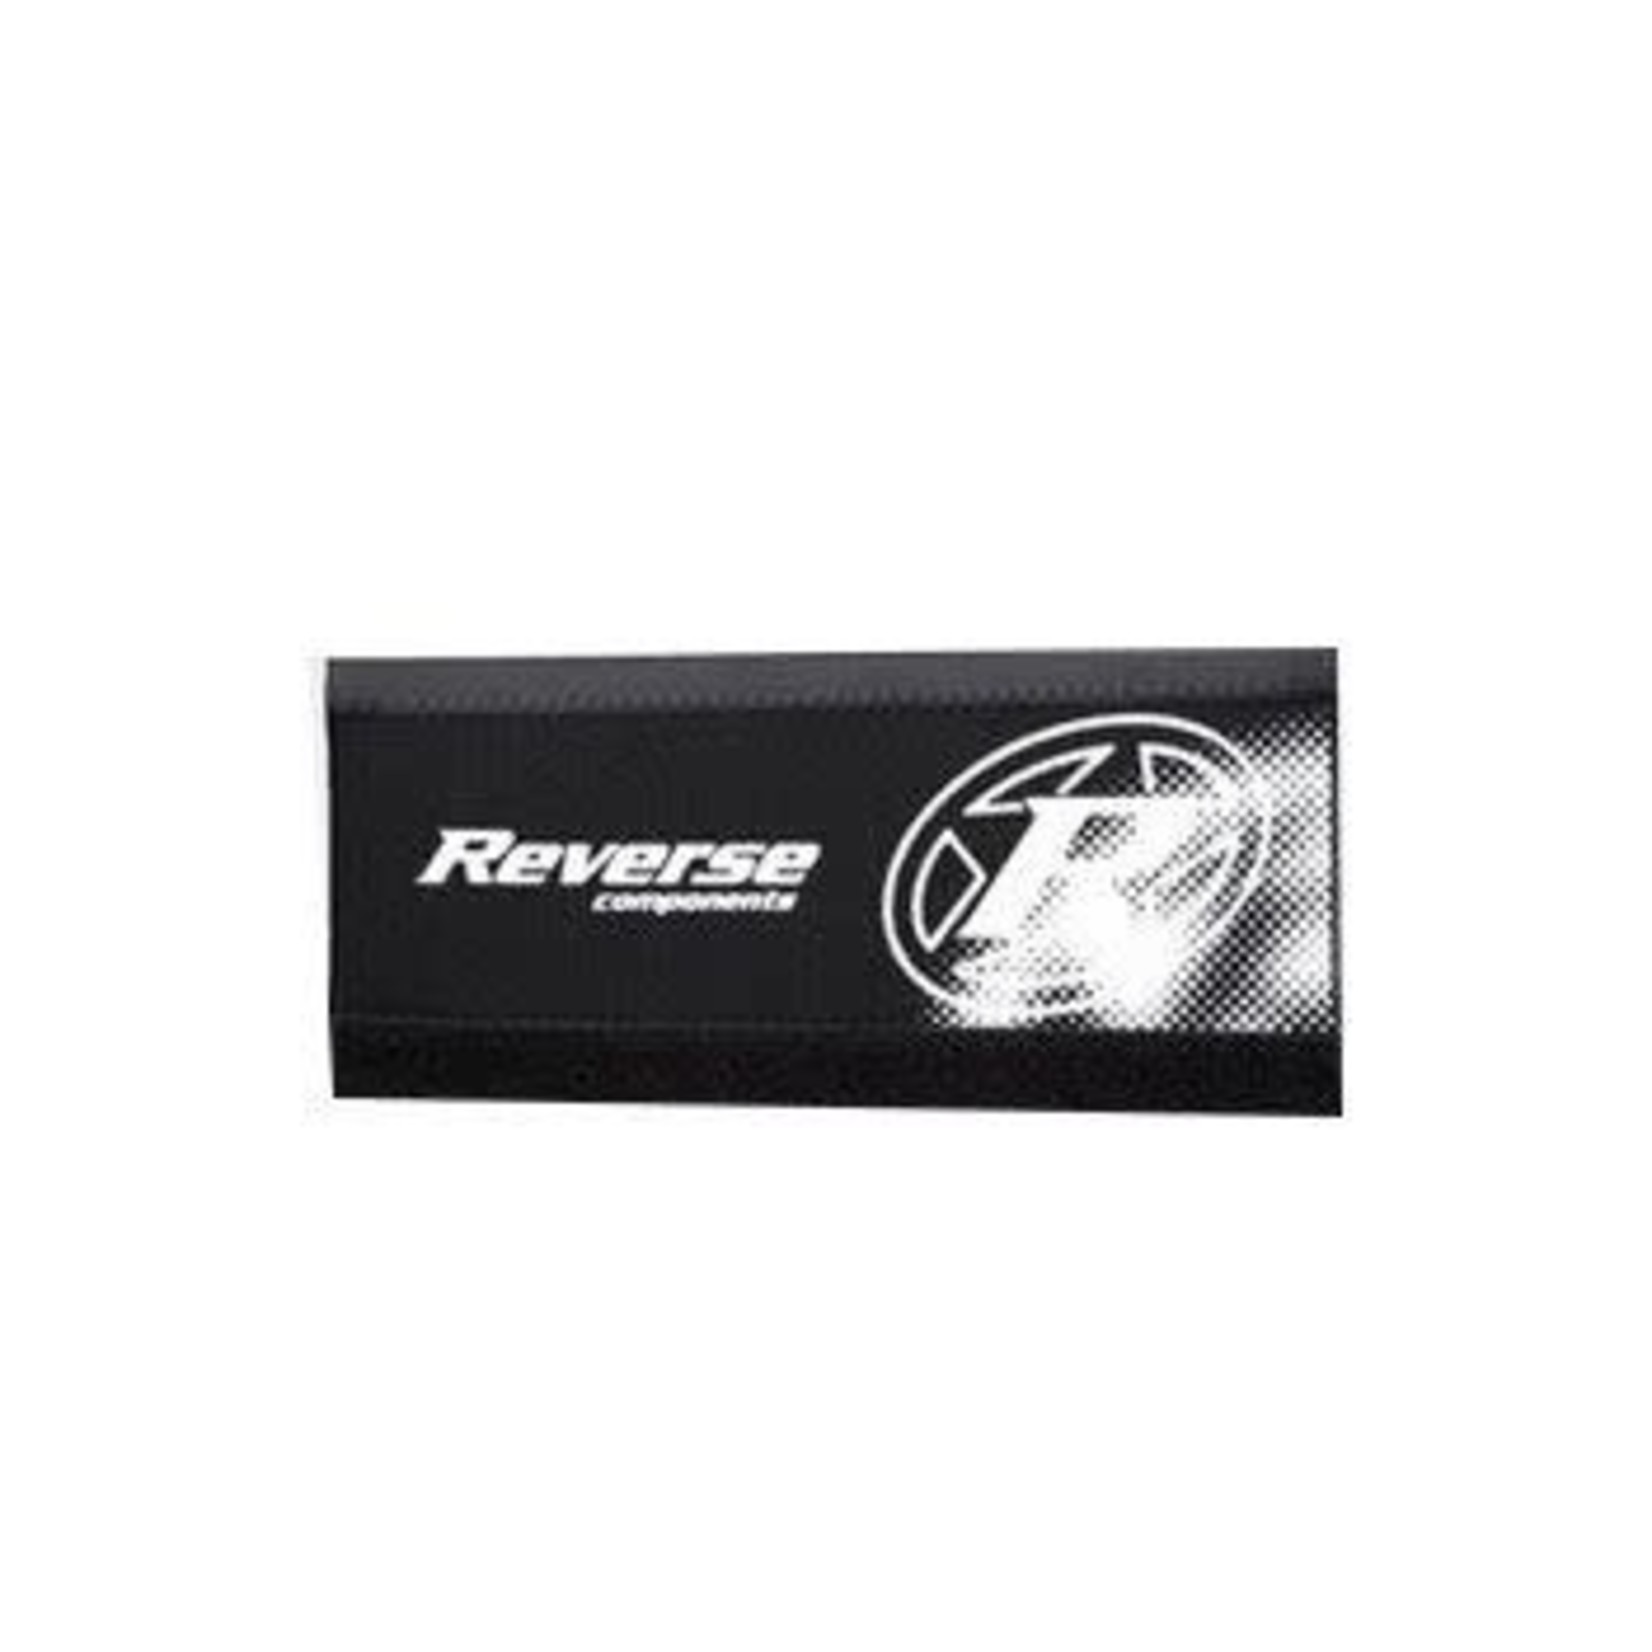 Reverse Reverse Components Chainstay Cover, Black/White